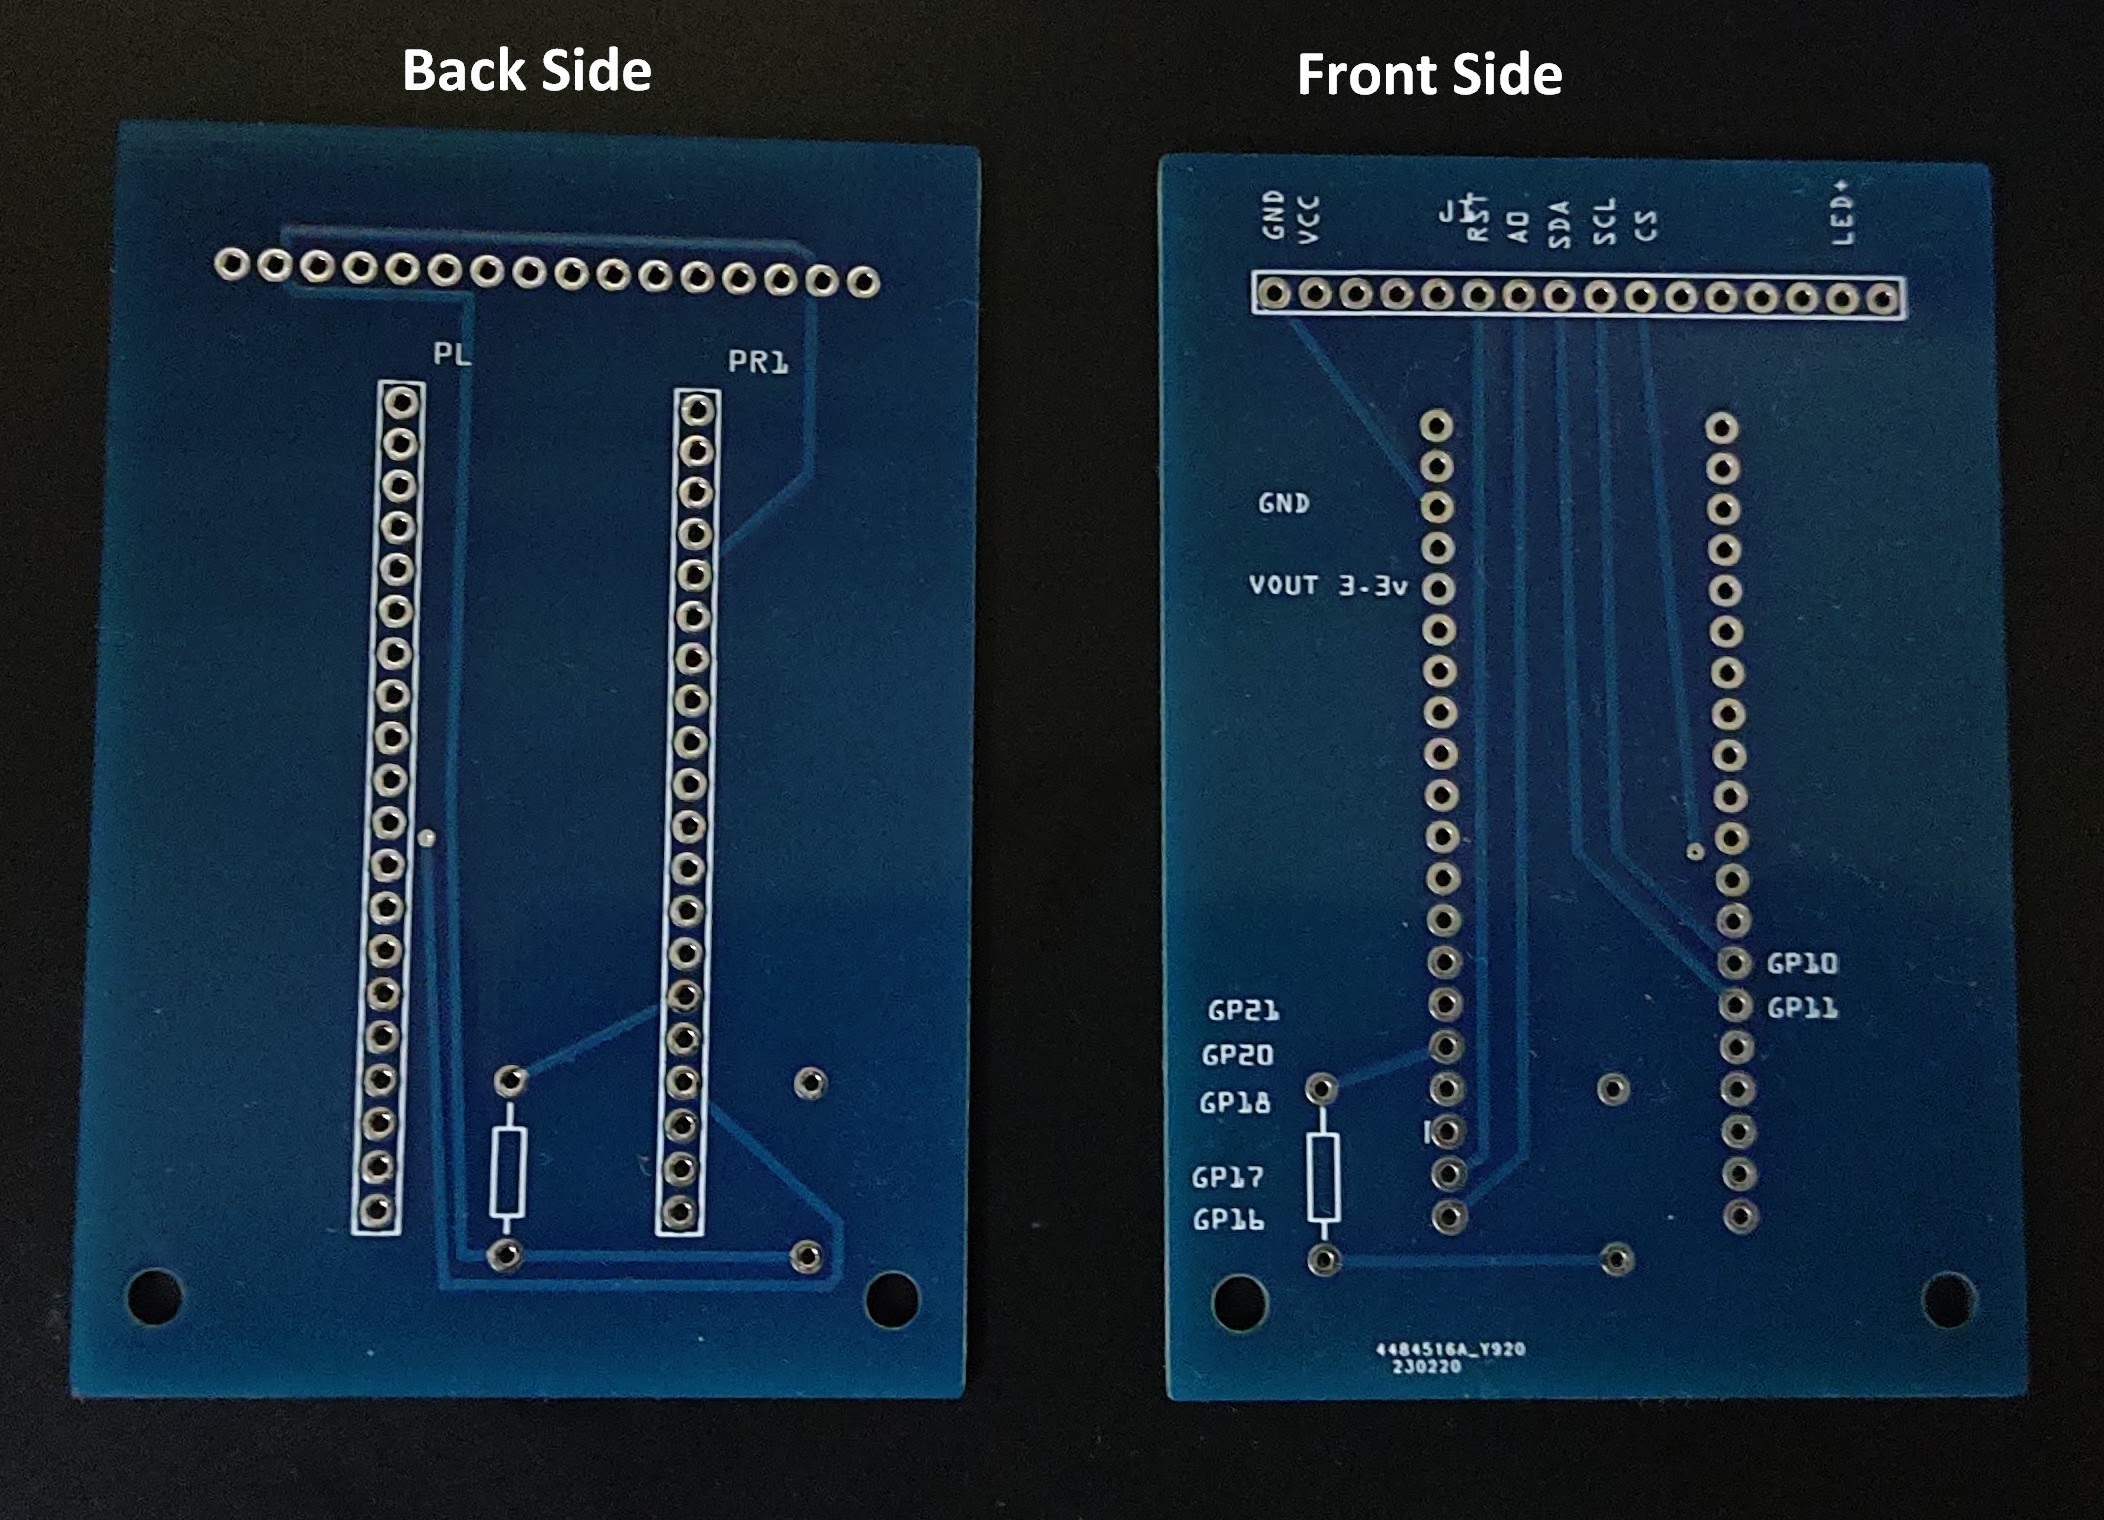 Front side and back side of PCB